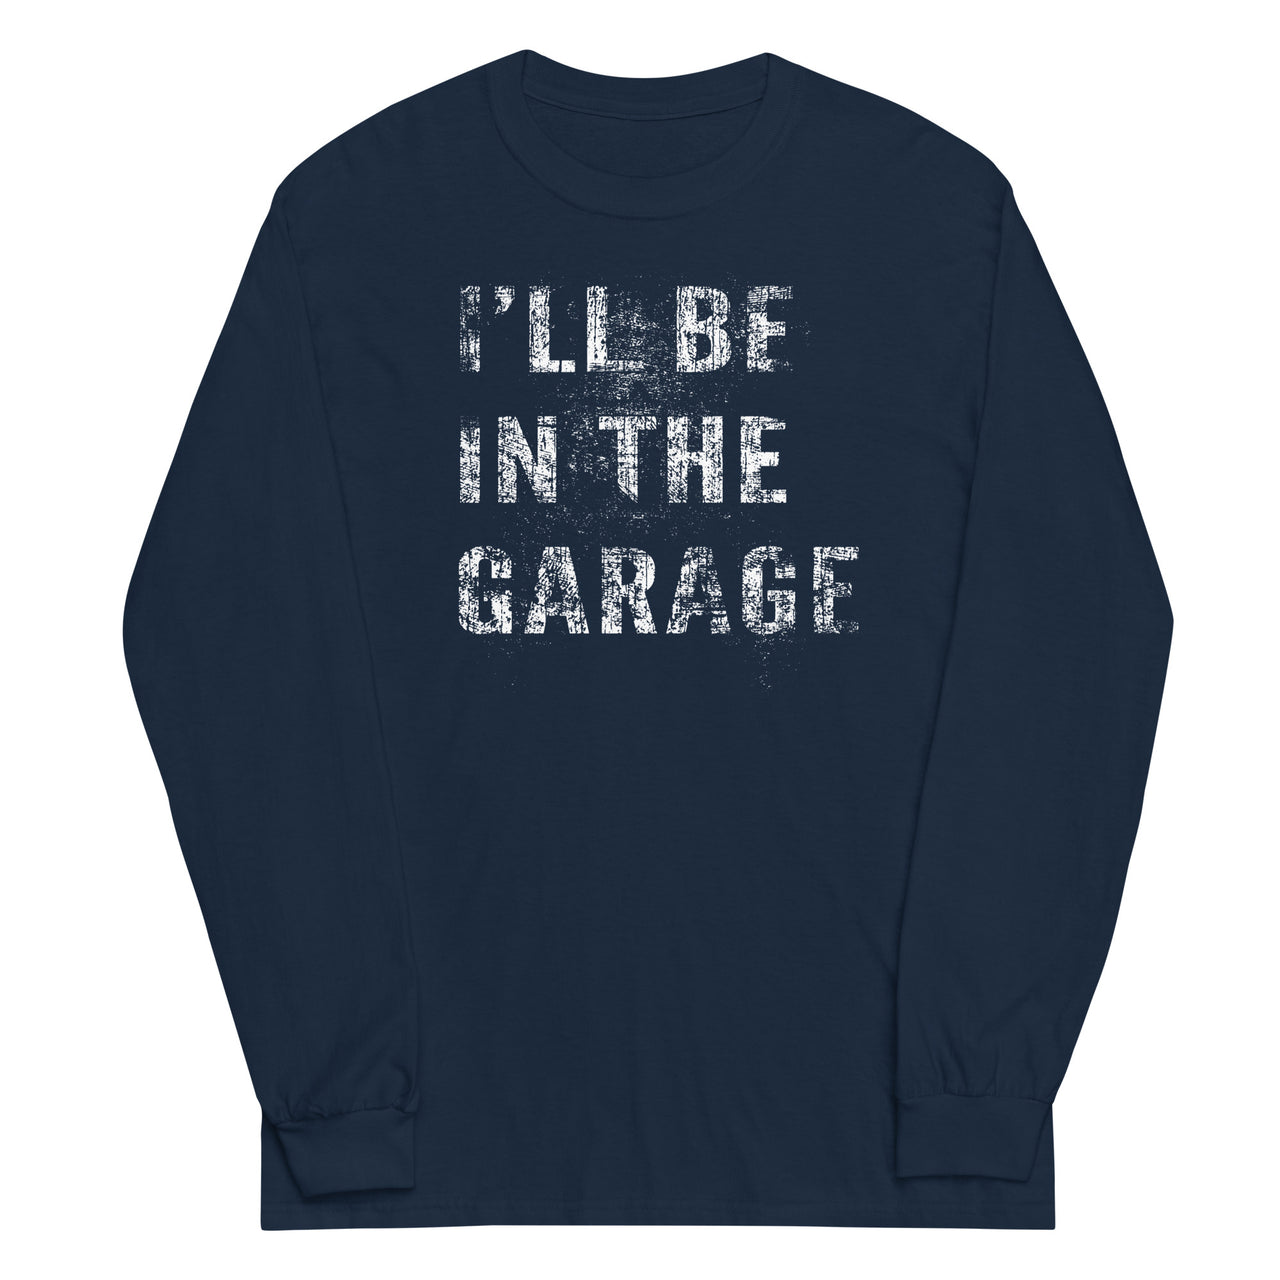 I'll Be In The Garage, Mechanic Shirt , Car Enthusiast Long Sleeve Shirt - in navy